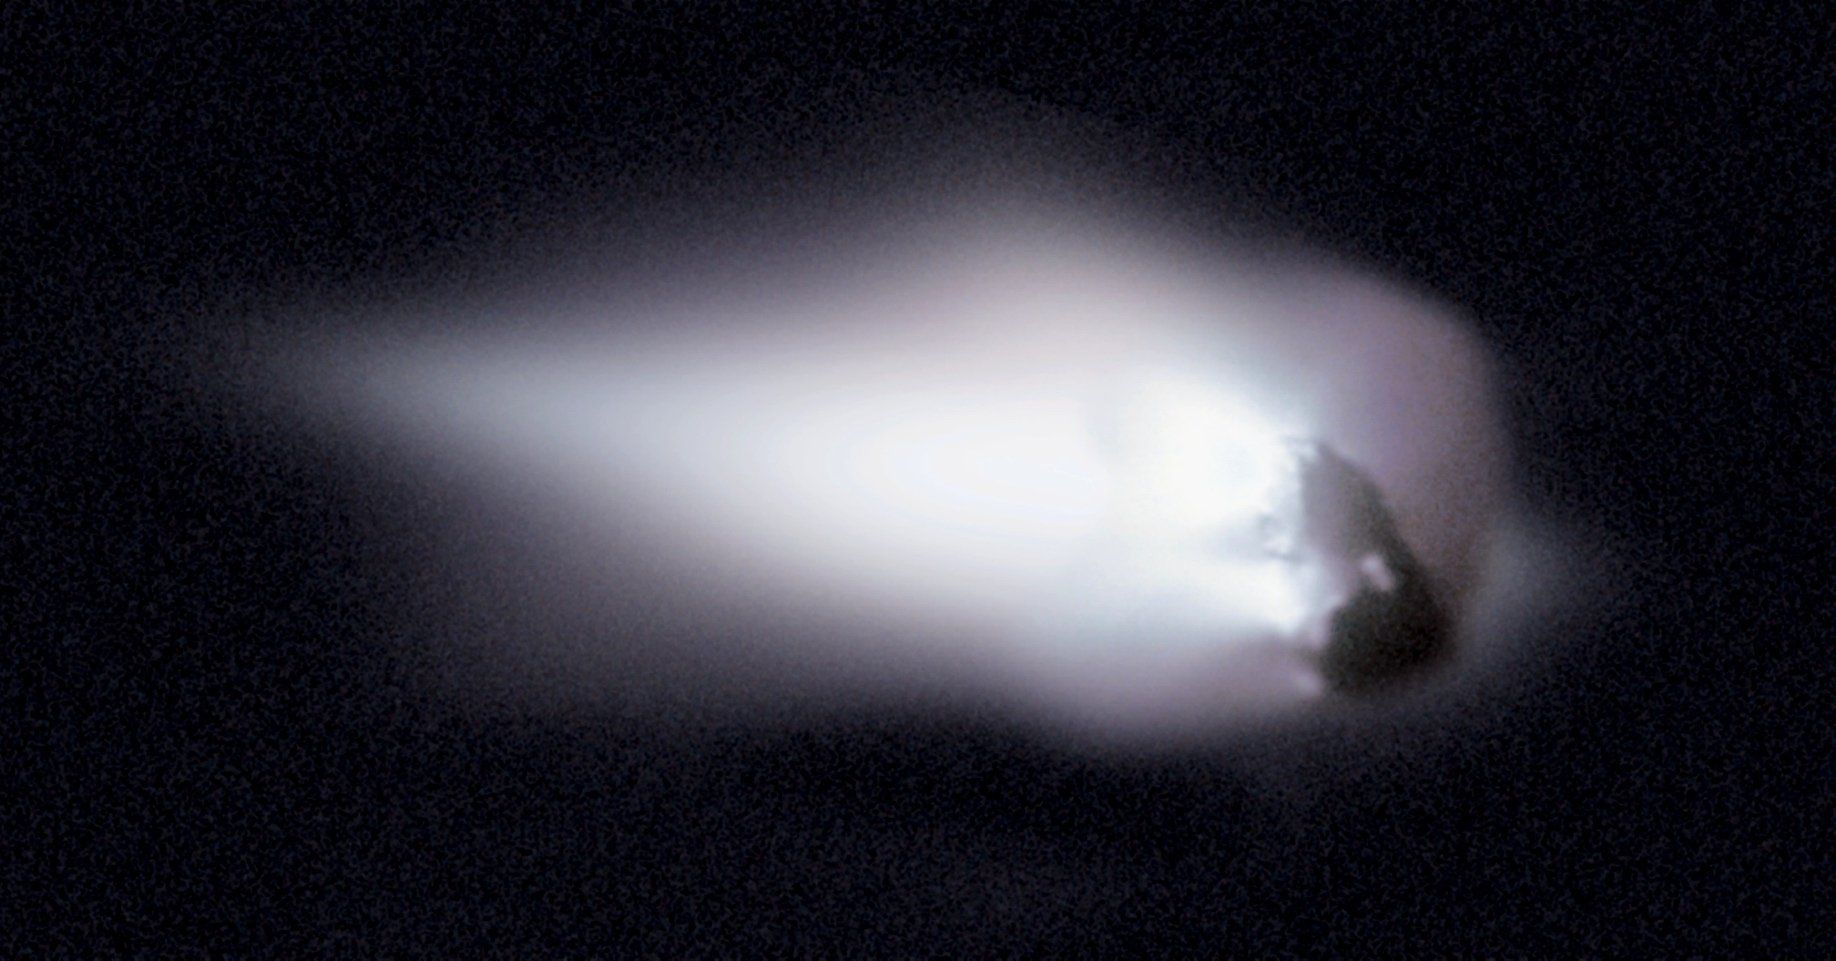 The nucleus of Halley’s Comet and coma